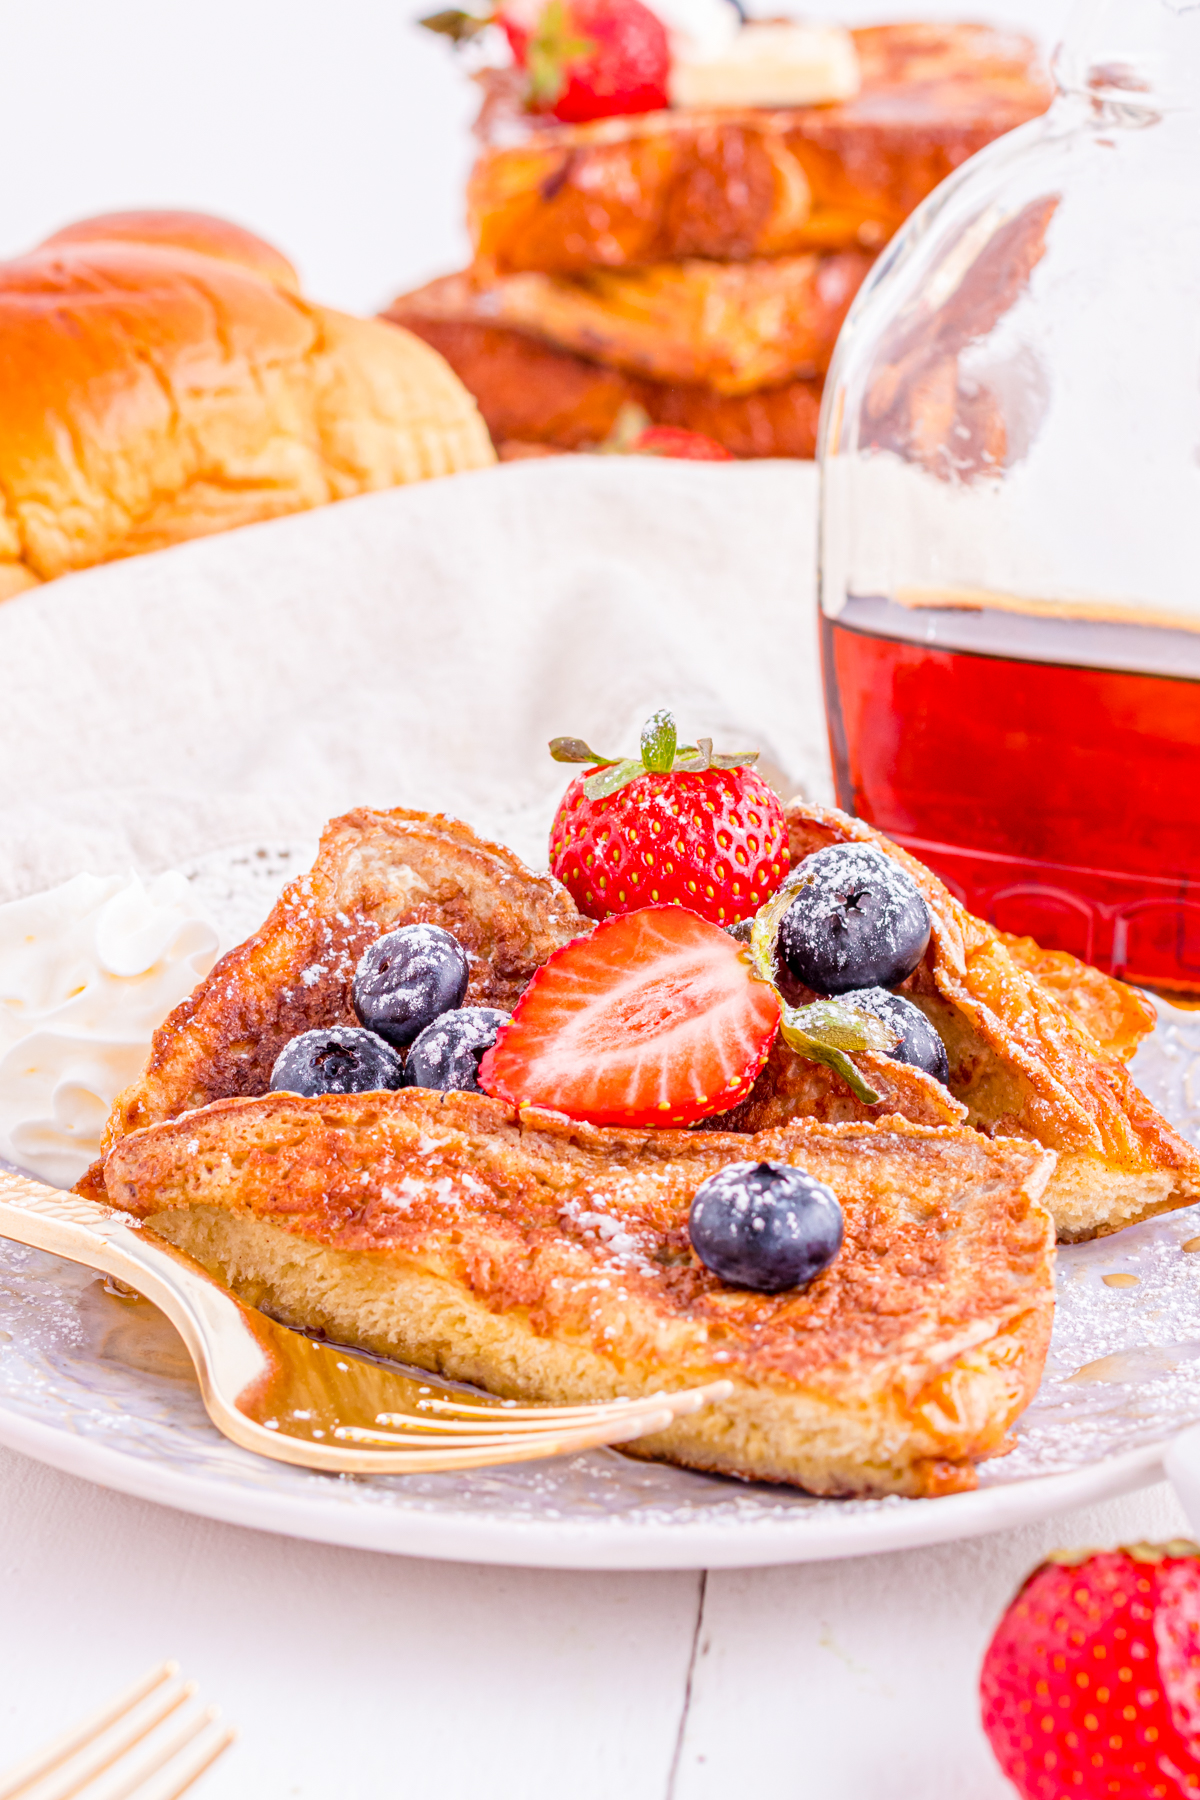 French toast slices on a plate with berries.